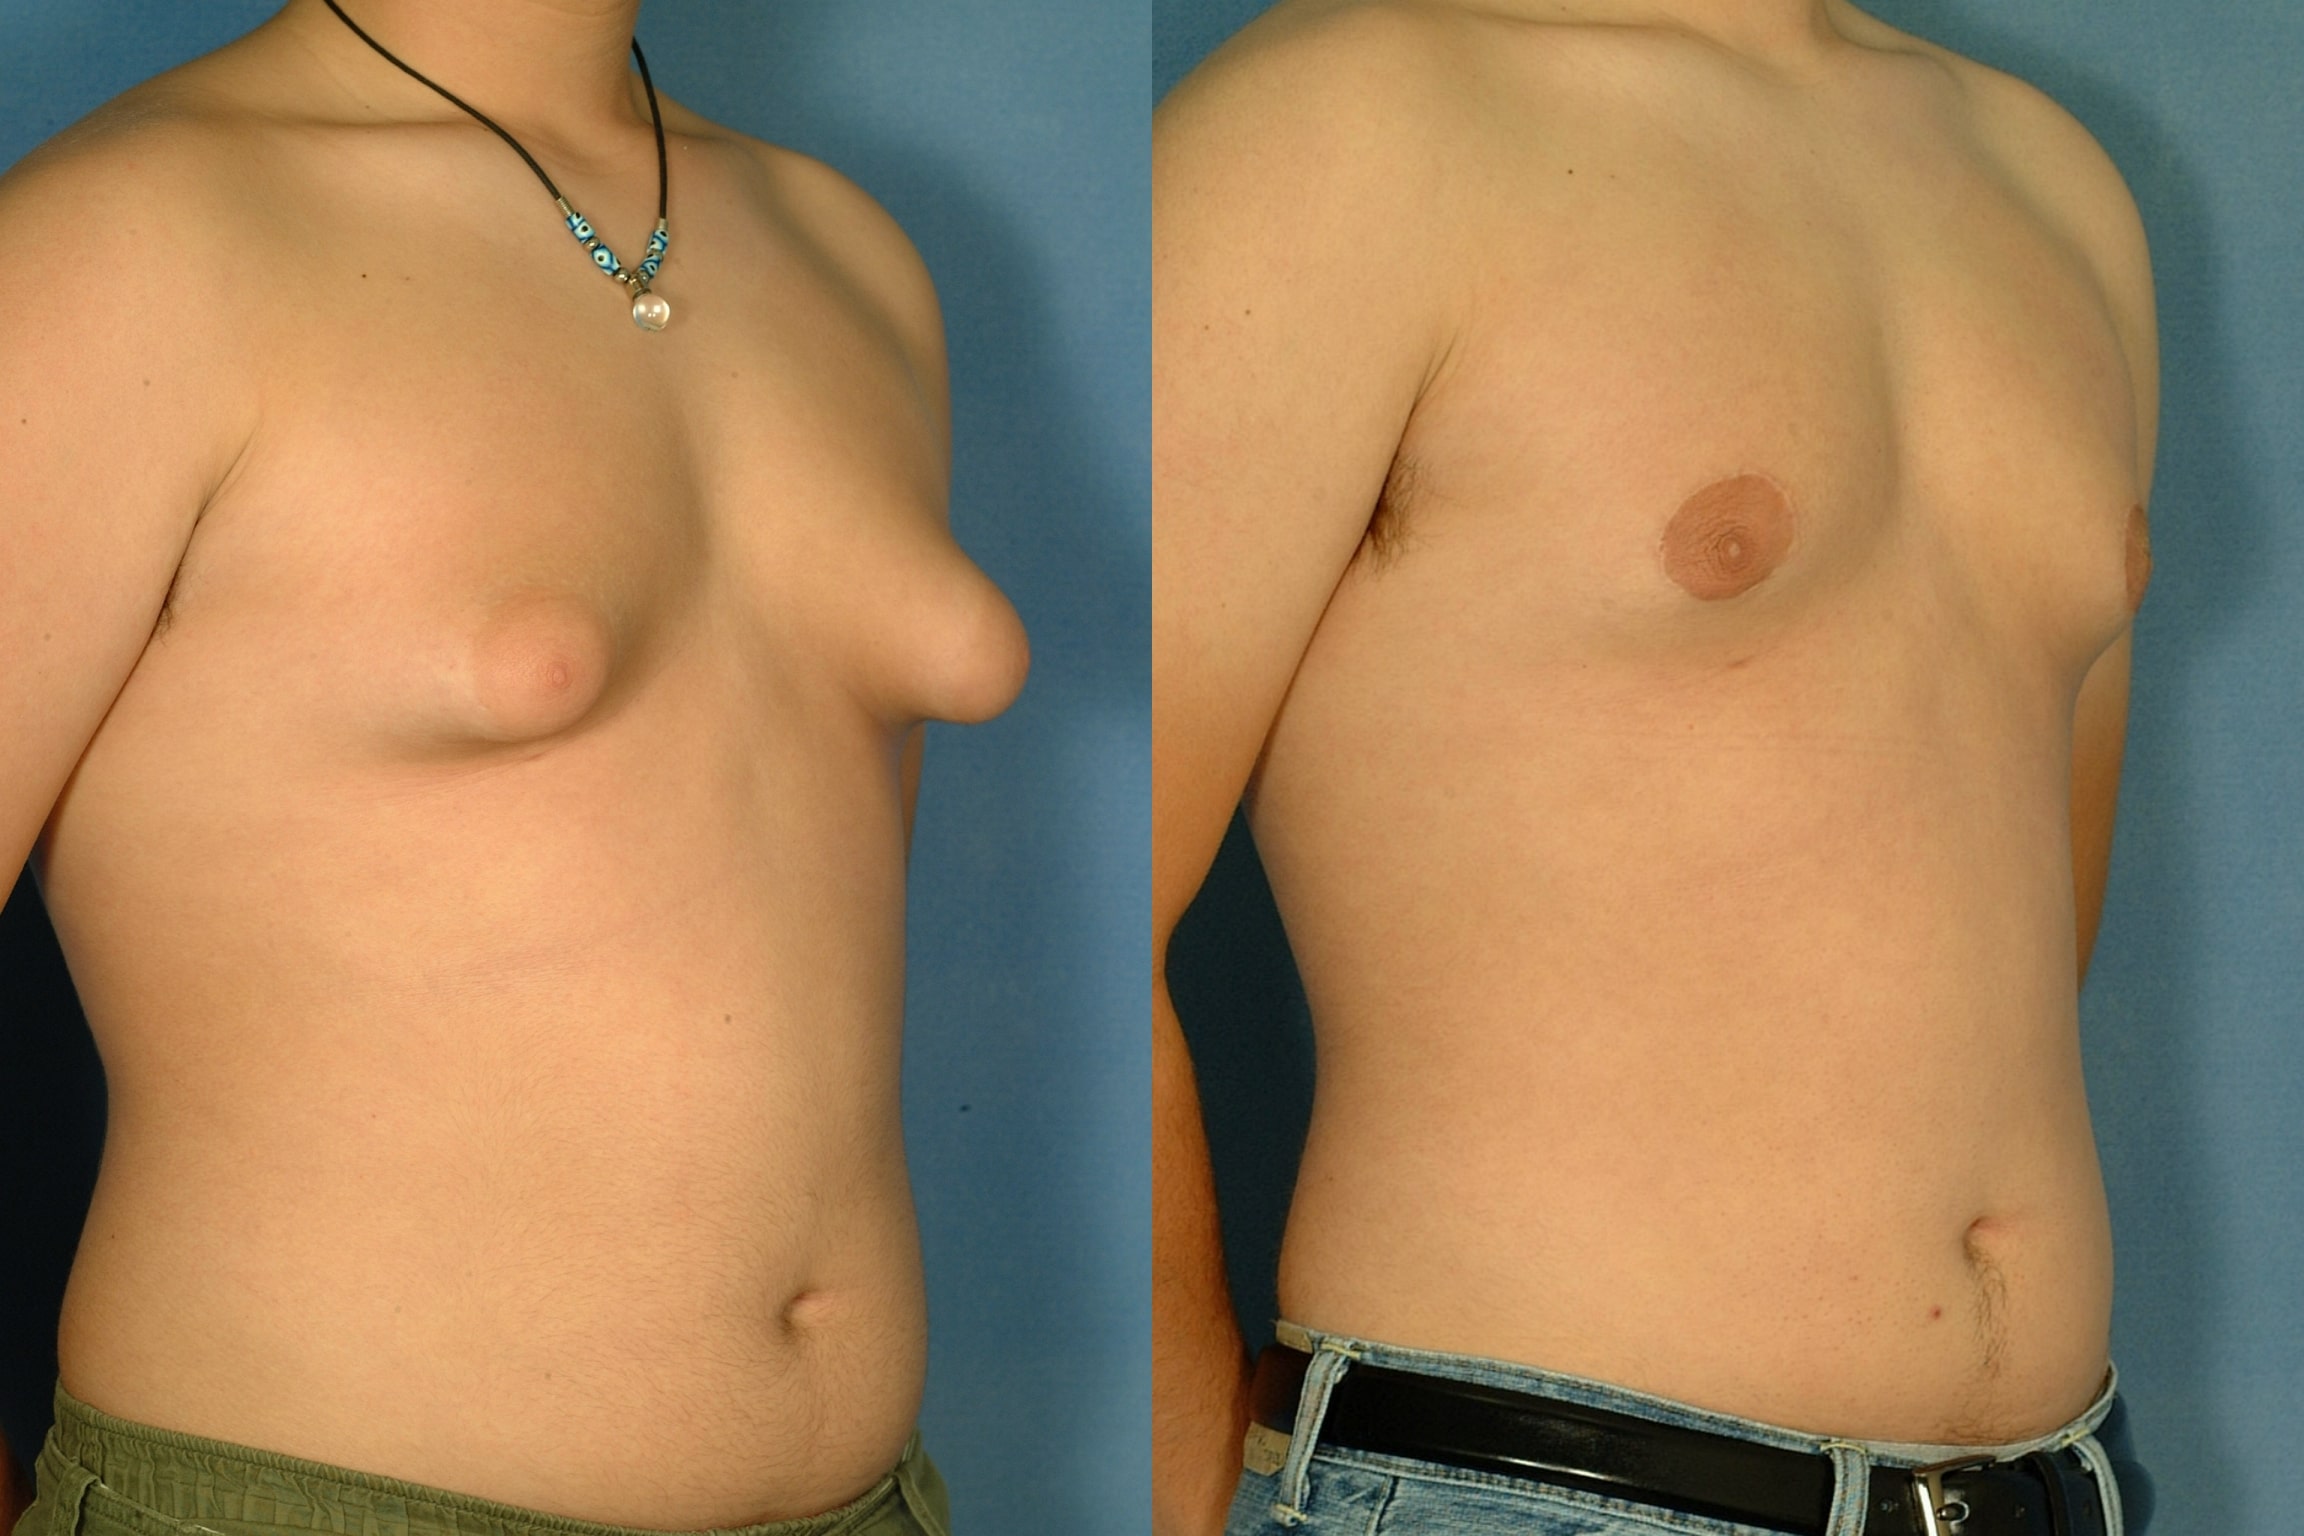 increase in the amount of breast gland tissue in mens